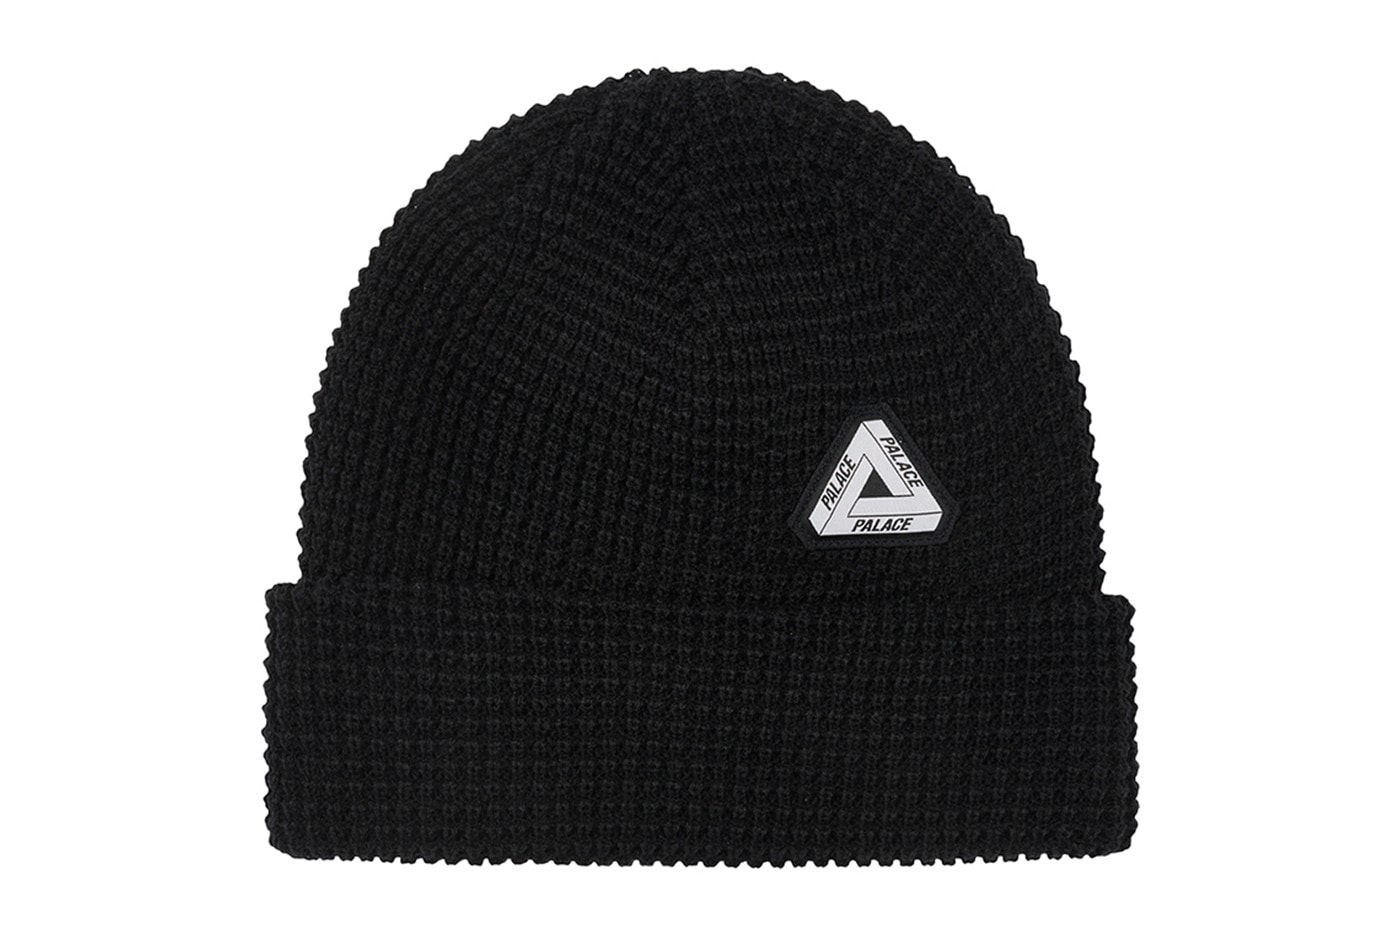 palace skateboards jumpers beanies shirts t-shirts